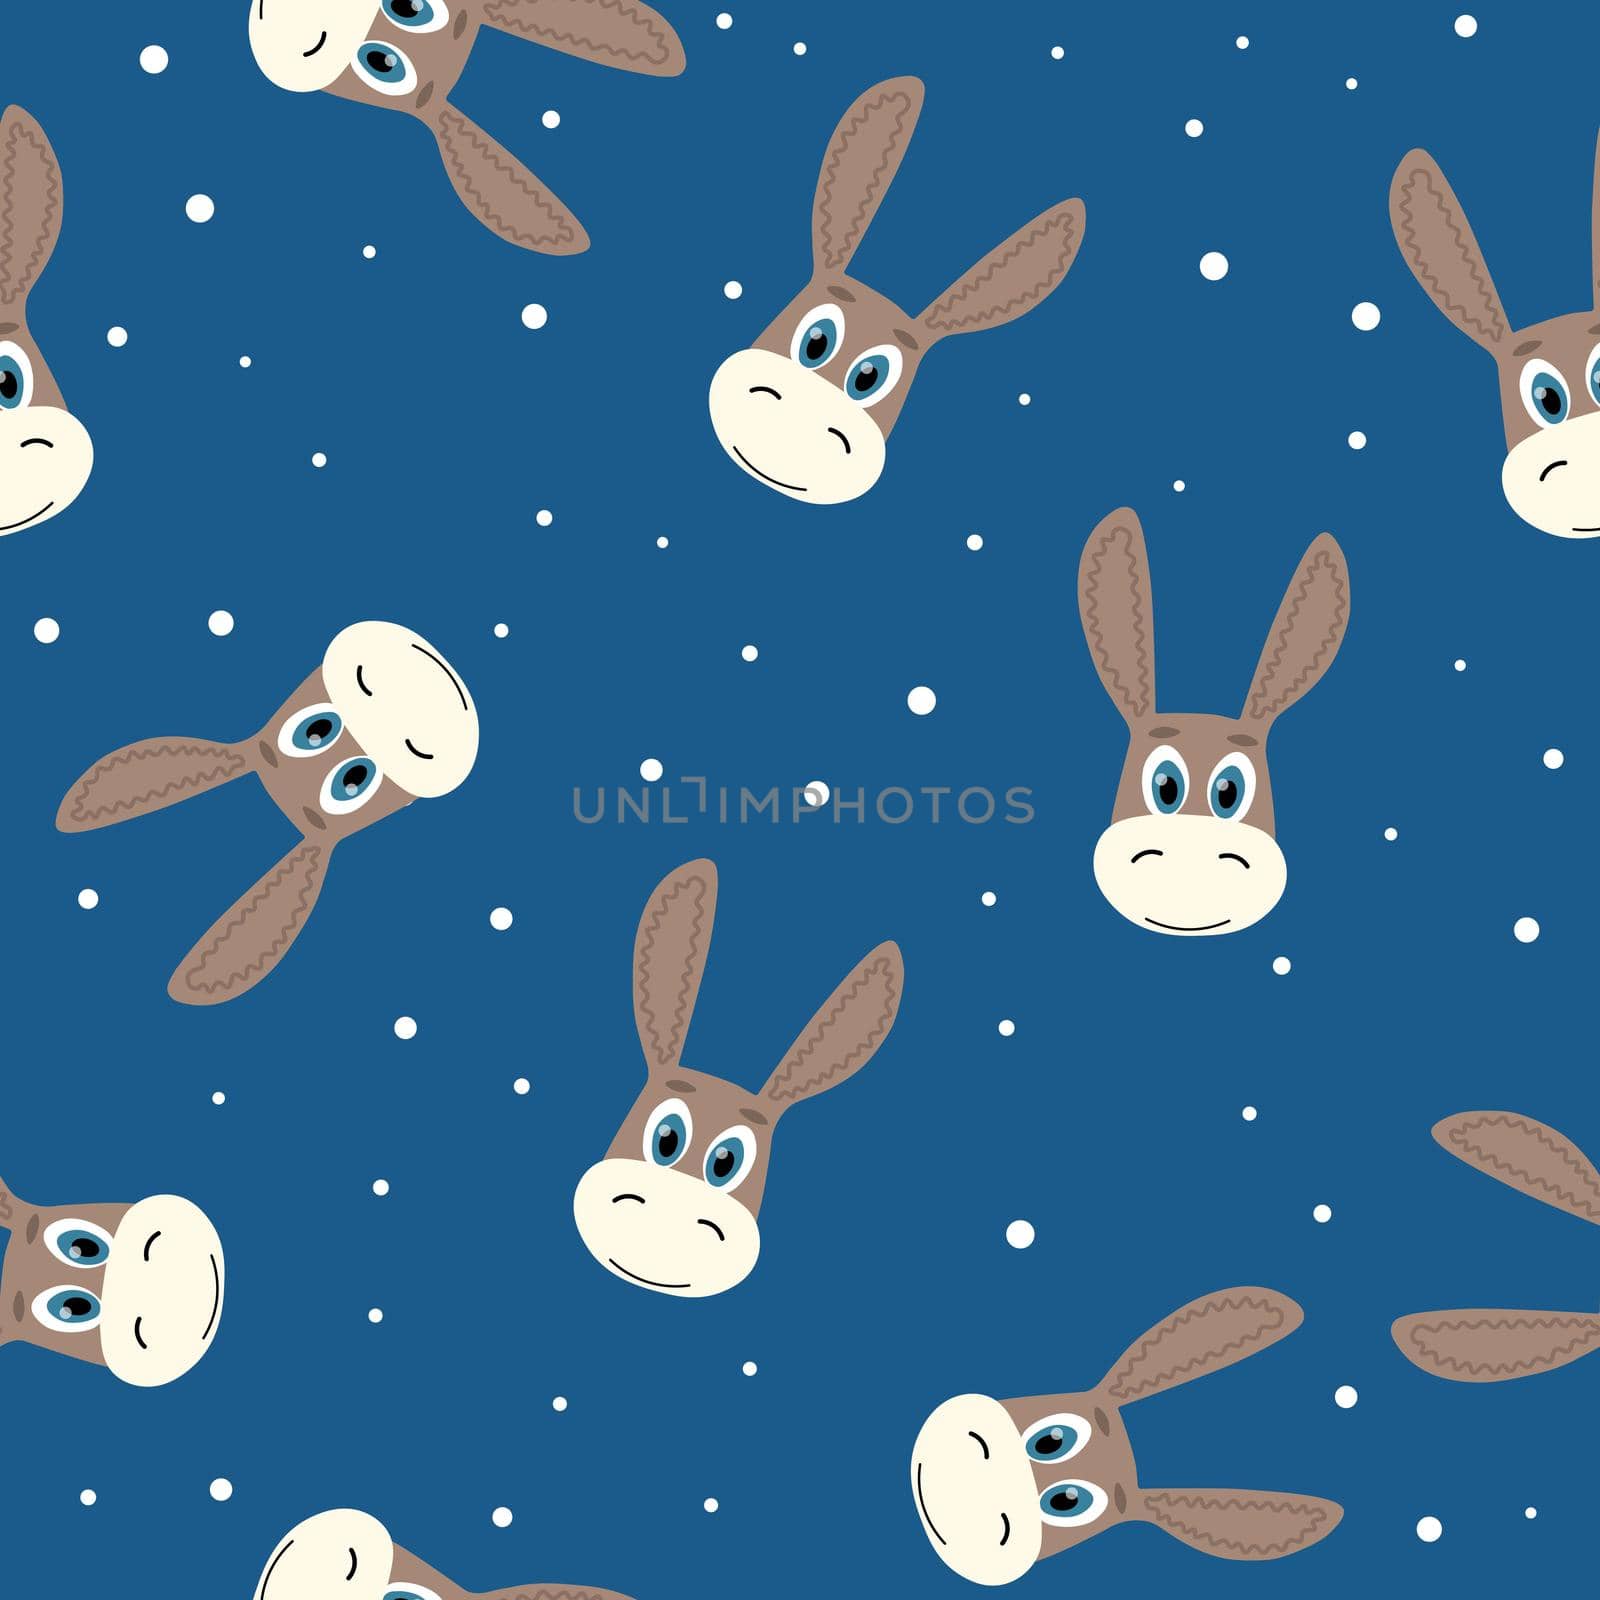 Vector flat animals colorful illustration for kids. Seamless pattern with cute donkey face on blue polka dots background. Cartoon adorable character. Design for textures, card, poster, fabric,textile.